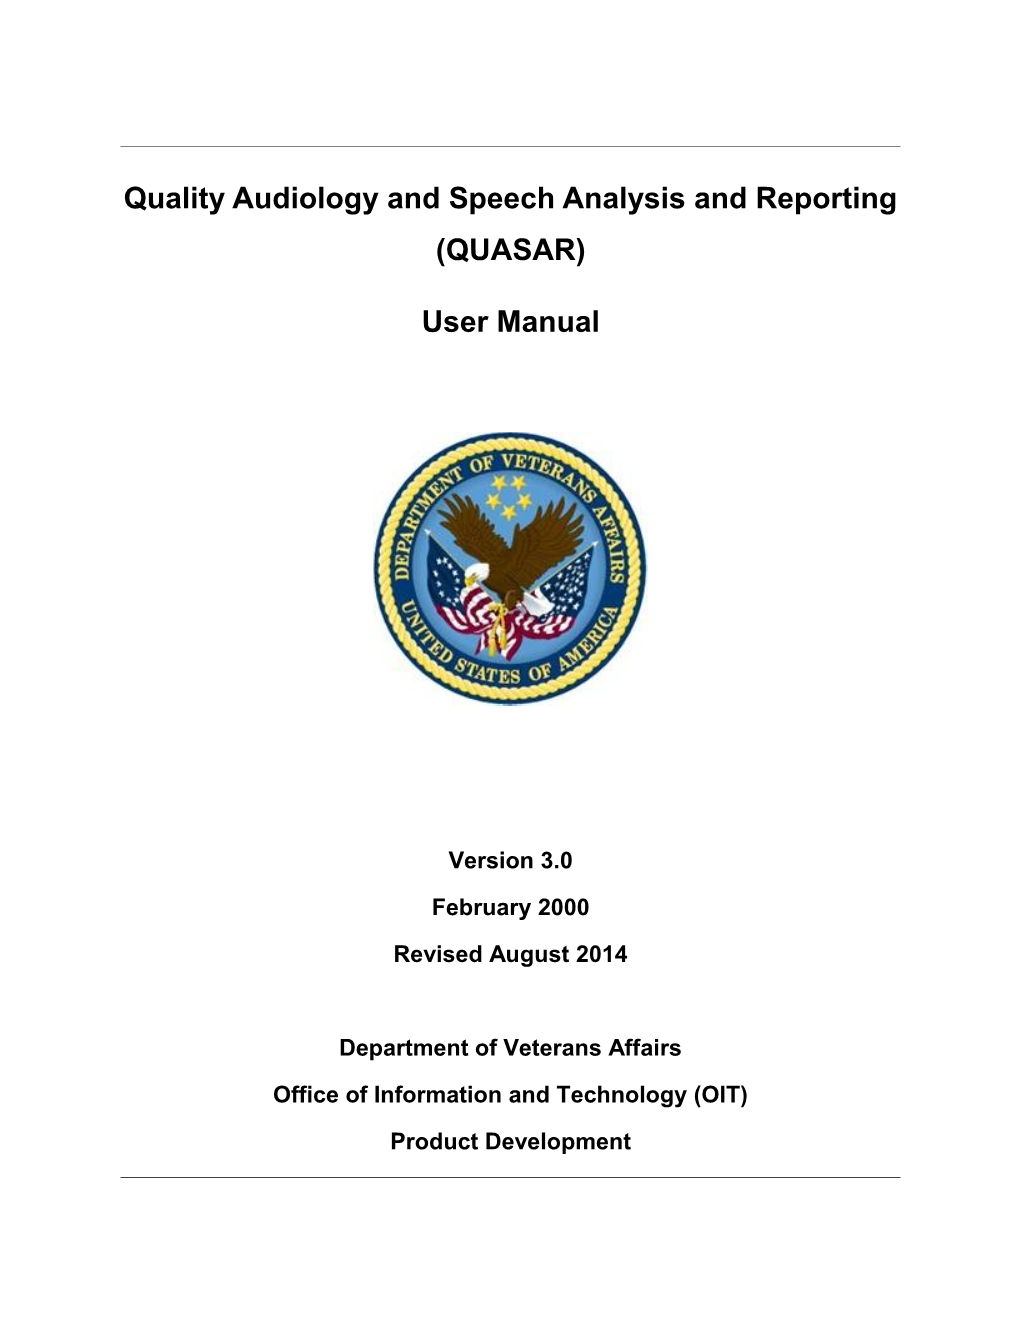 Quality Audiology and Speech Analysis and Reporting (QUASAR)